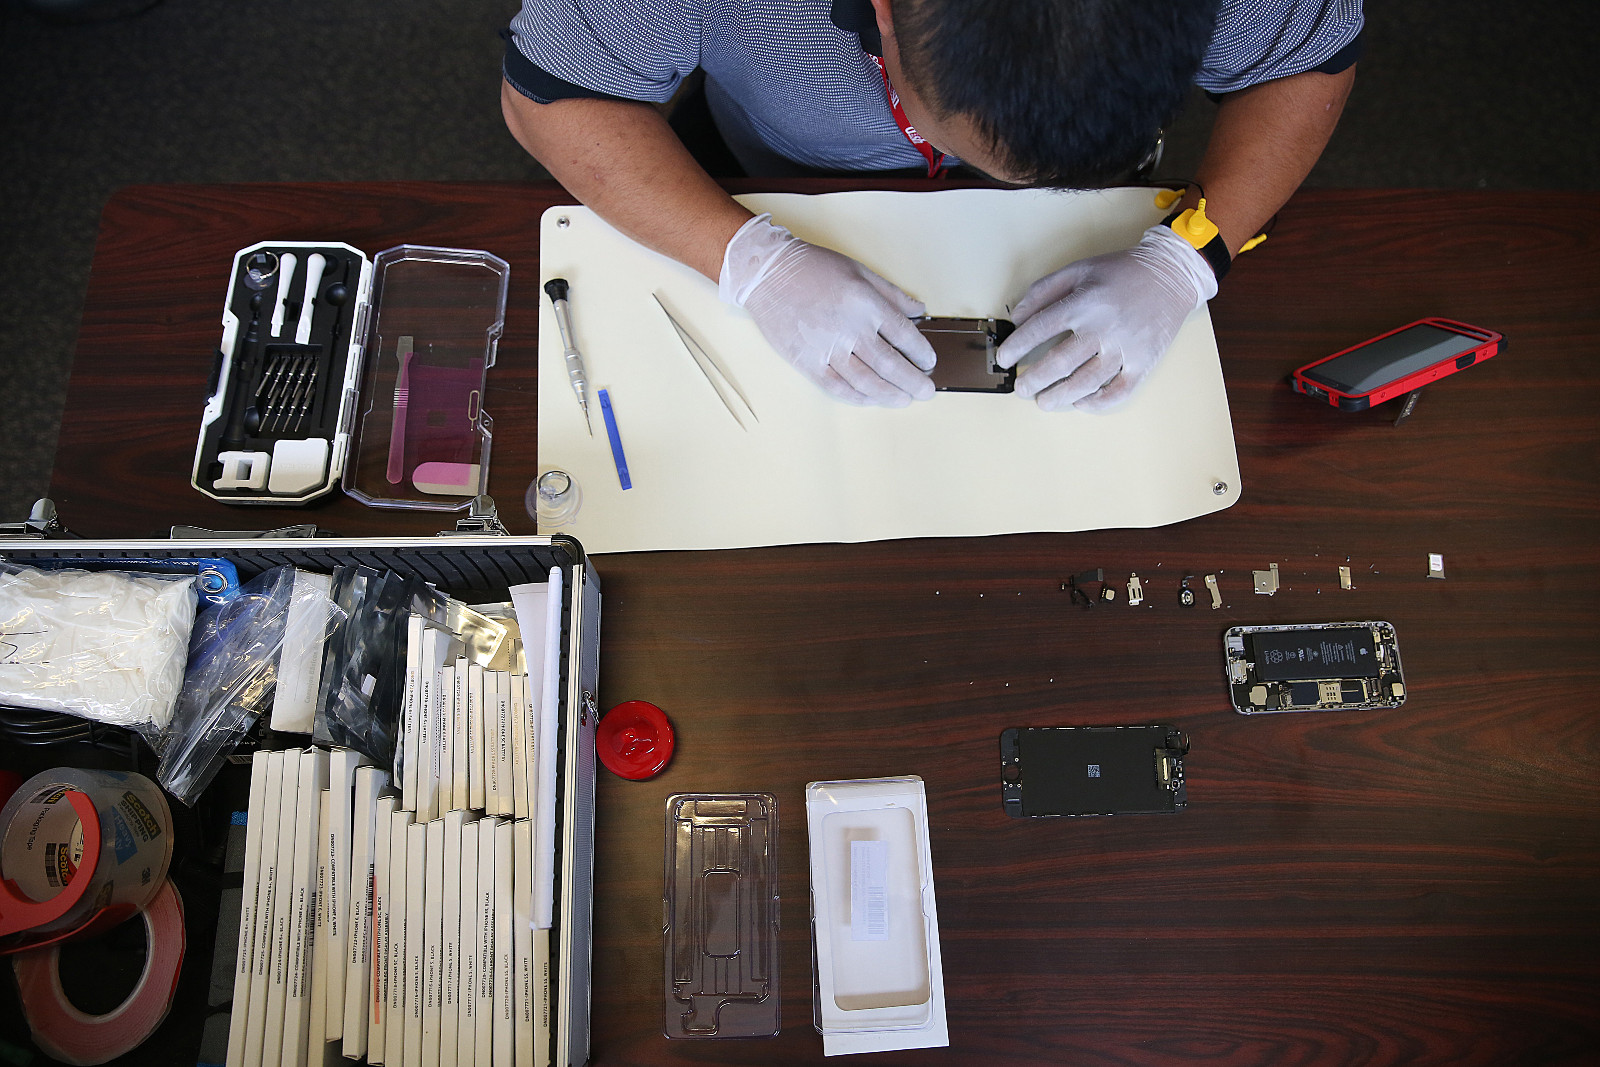 Dish employee Johnson Chuong takes apart an iPhone to fix a cracked screen in San Francisco, California, in 2016.